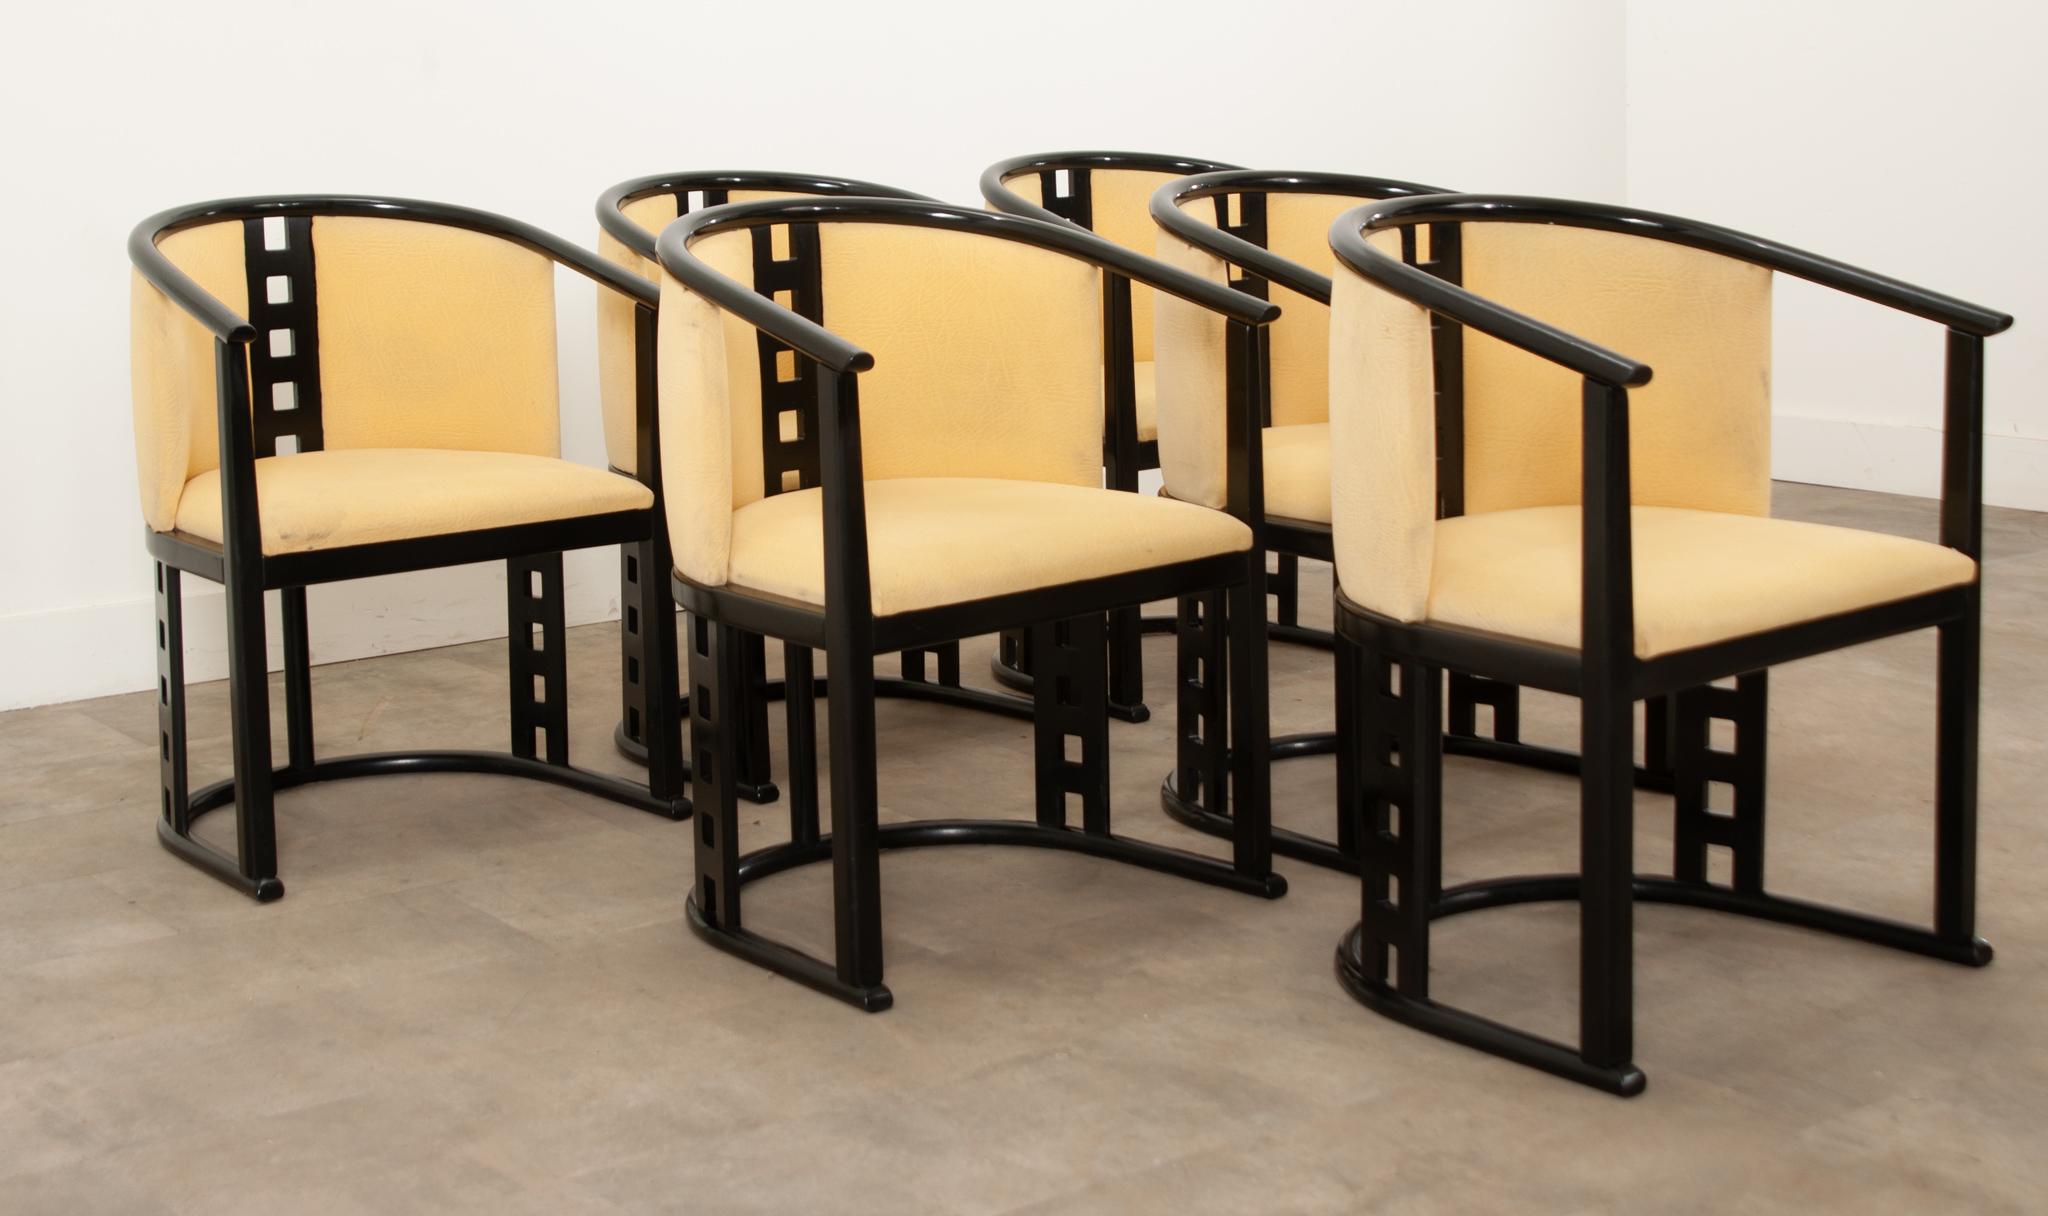 Polished Set of Six Josef Hoffmann Style Secessionist Chairs For Sale